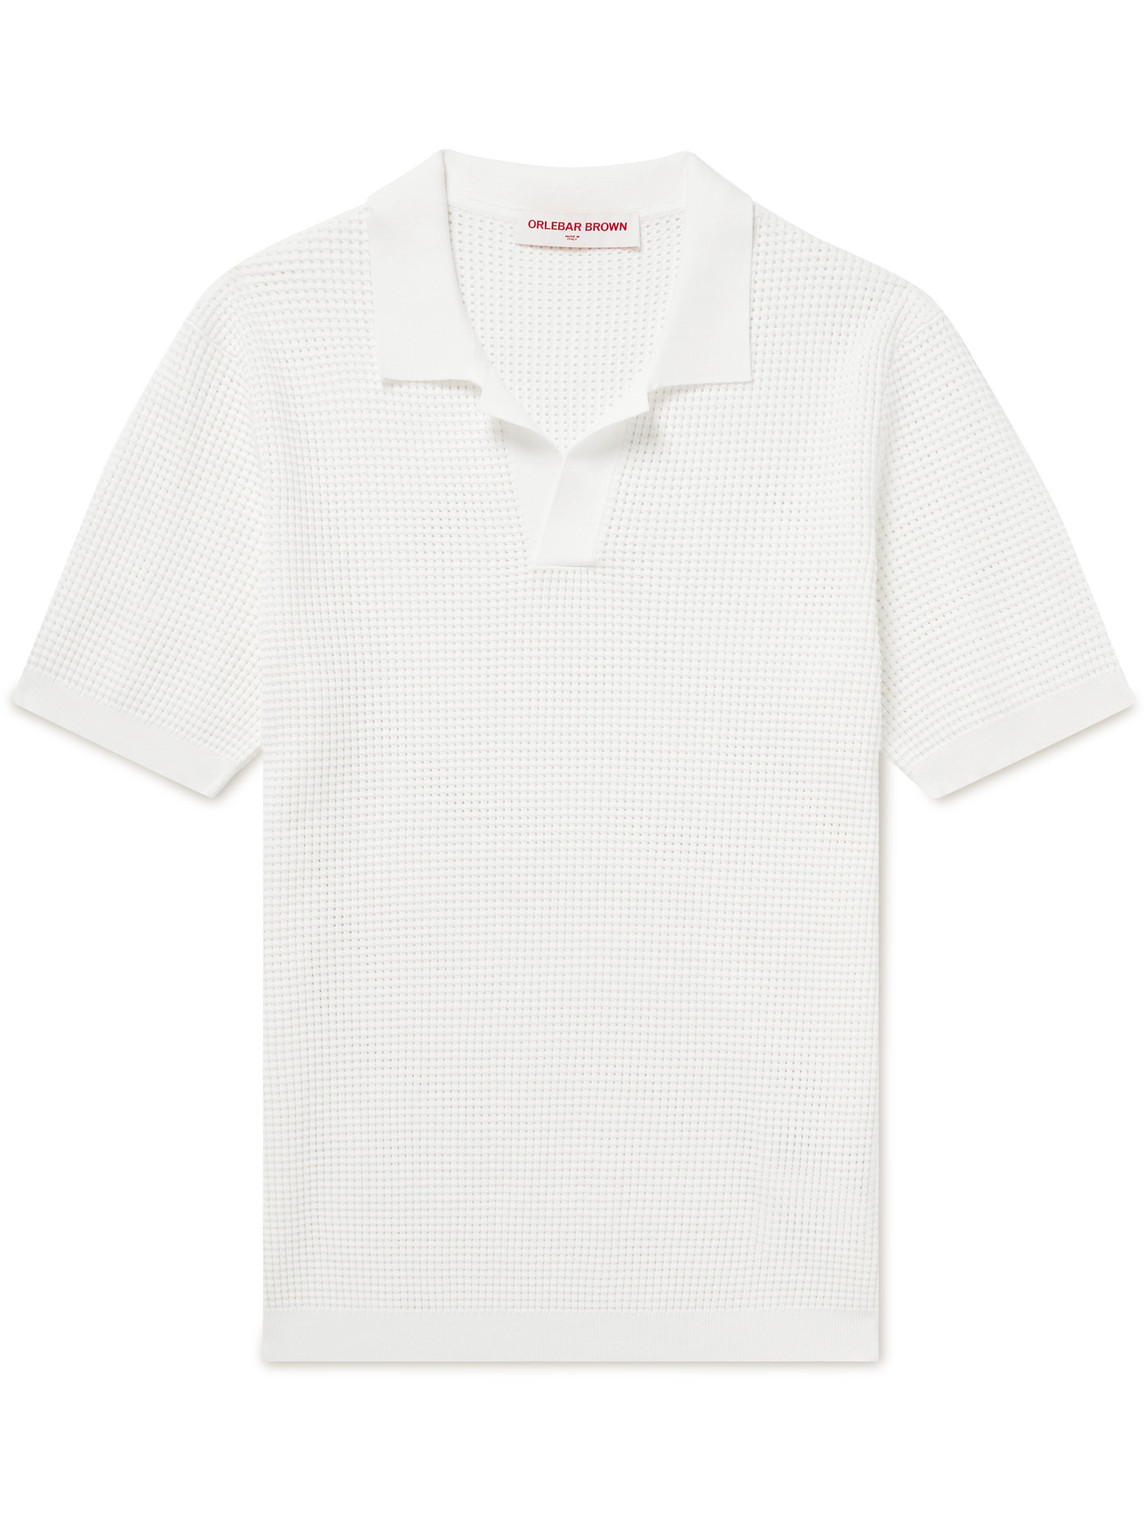 Orlebar Brown Roddy Perforated Polo Shirt In White